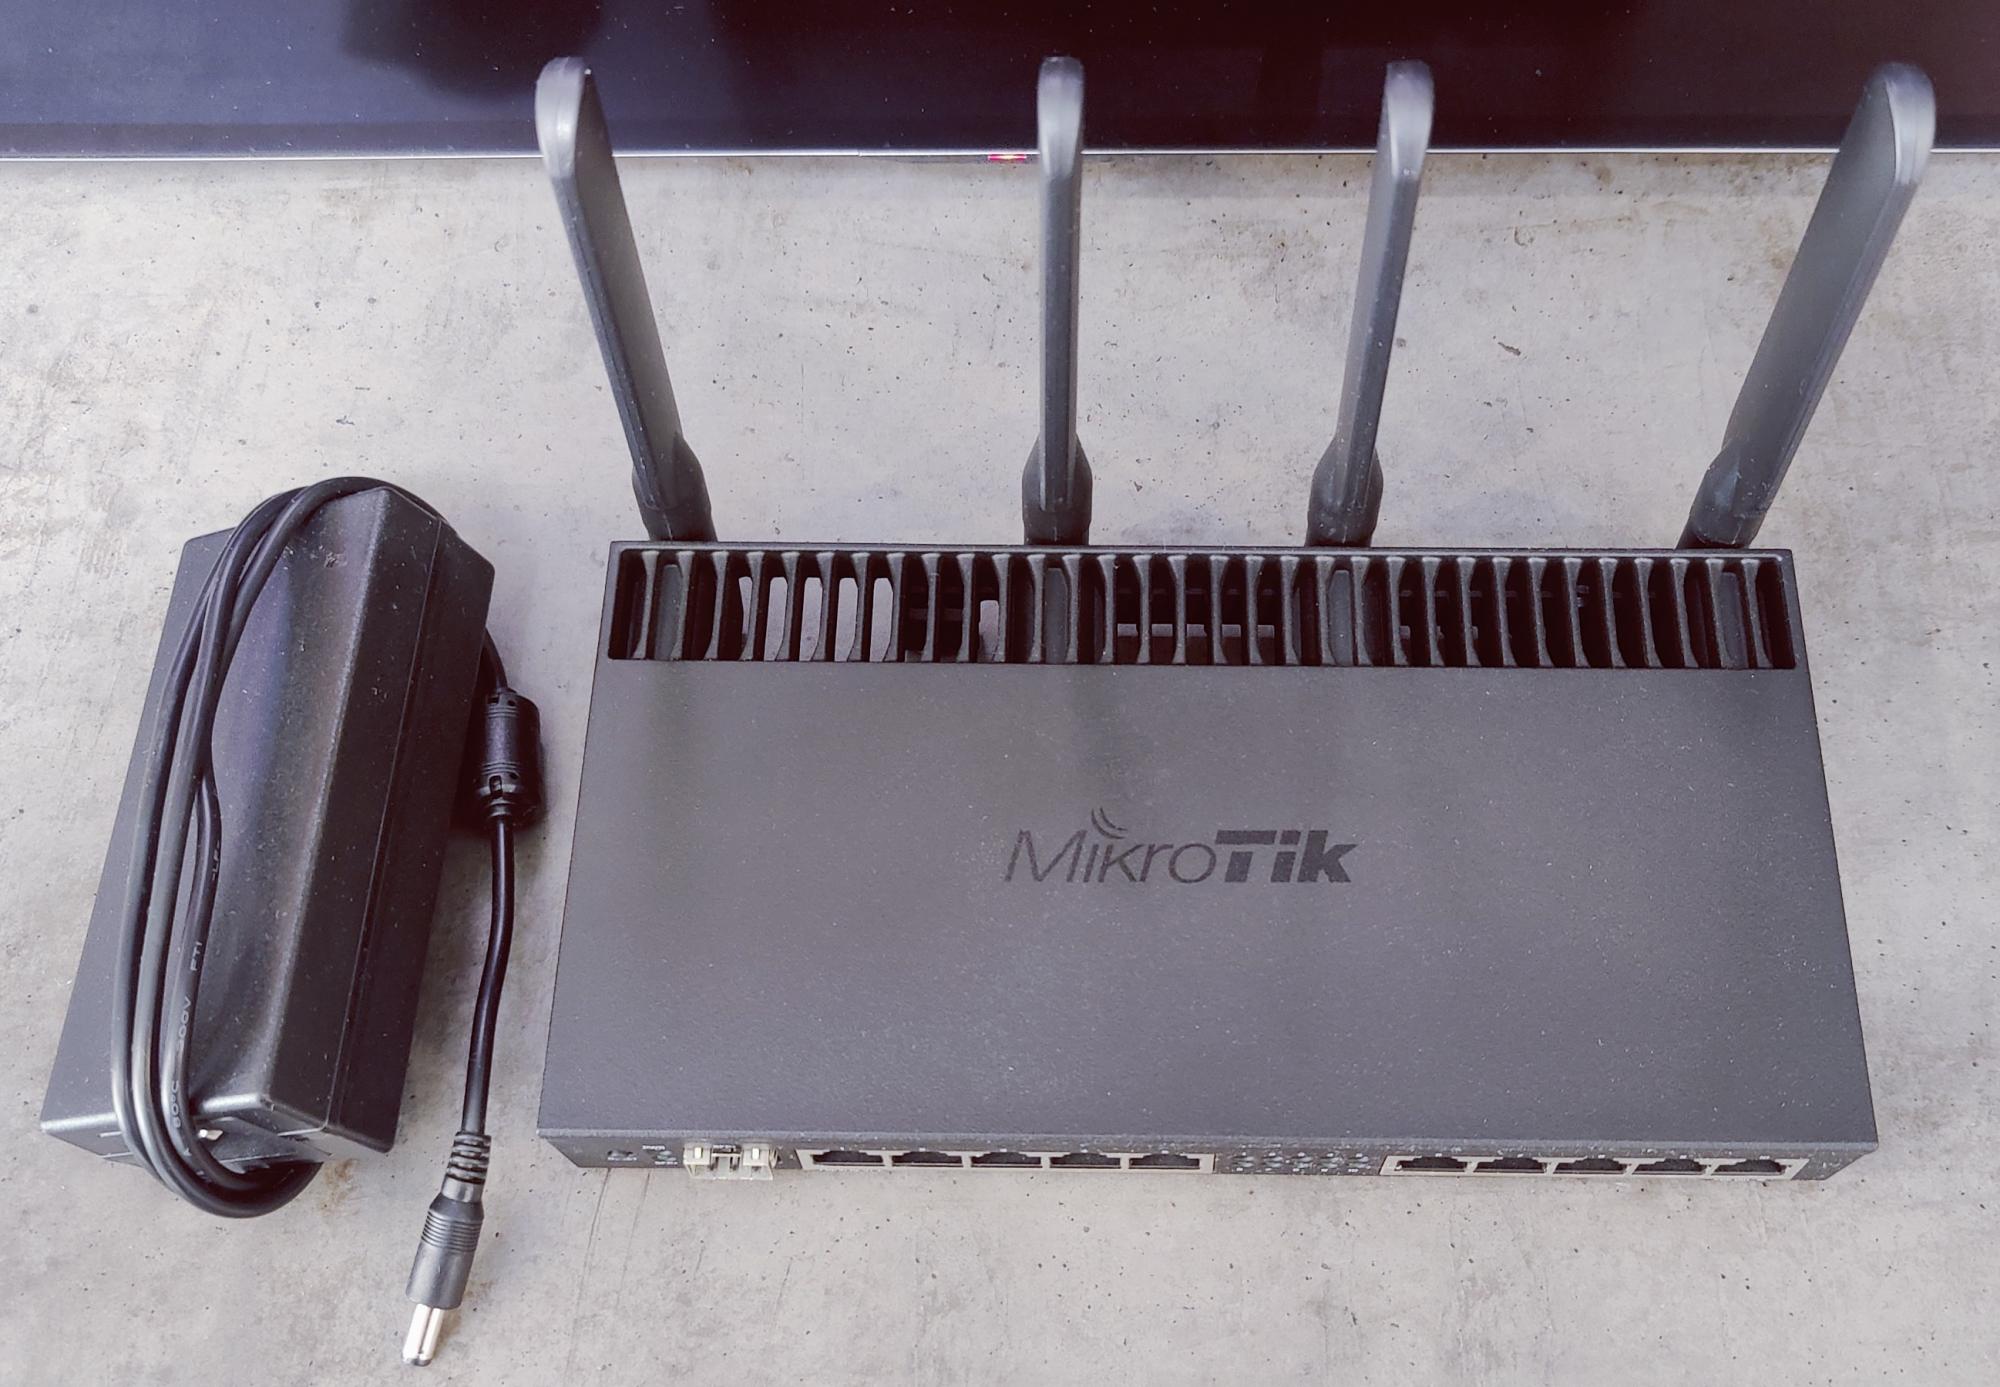 Rb4011igs 5hacq2hnd in. Mikrotik rb4011igs+5hacq2hnd-in.